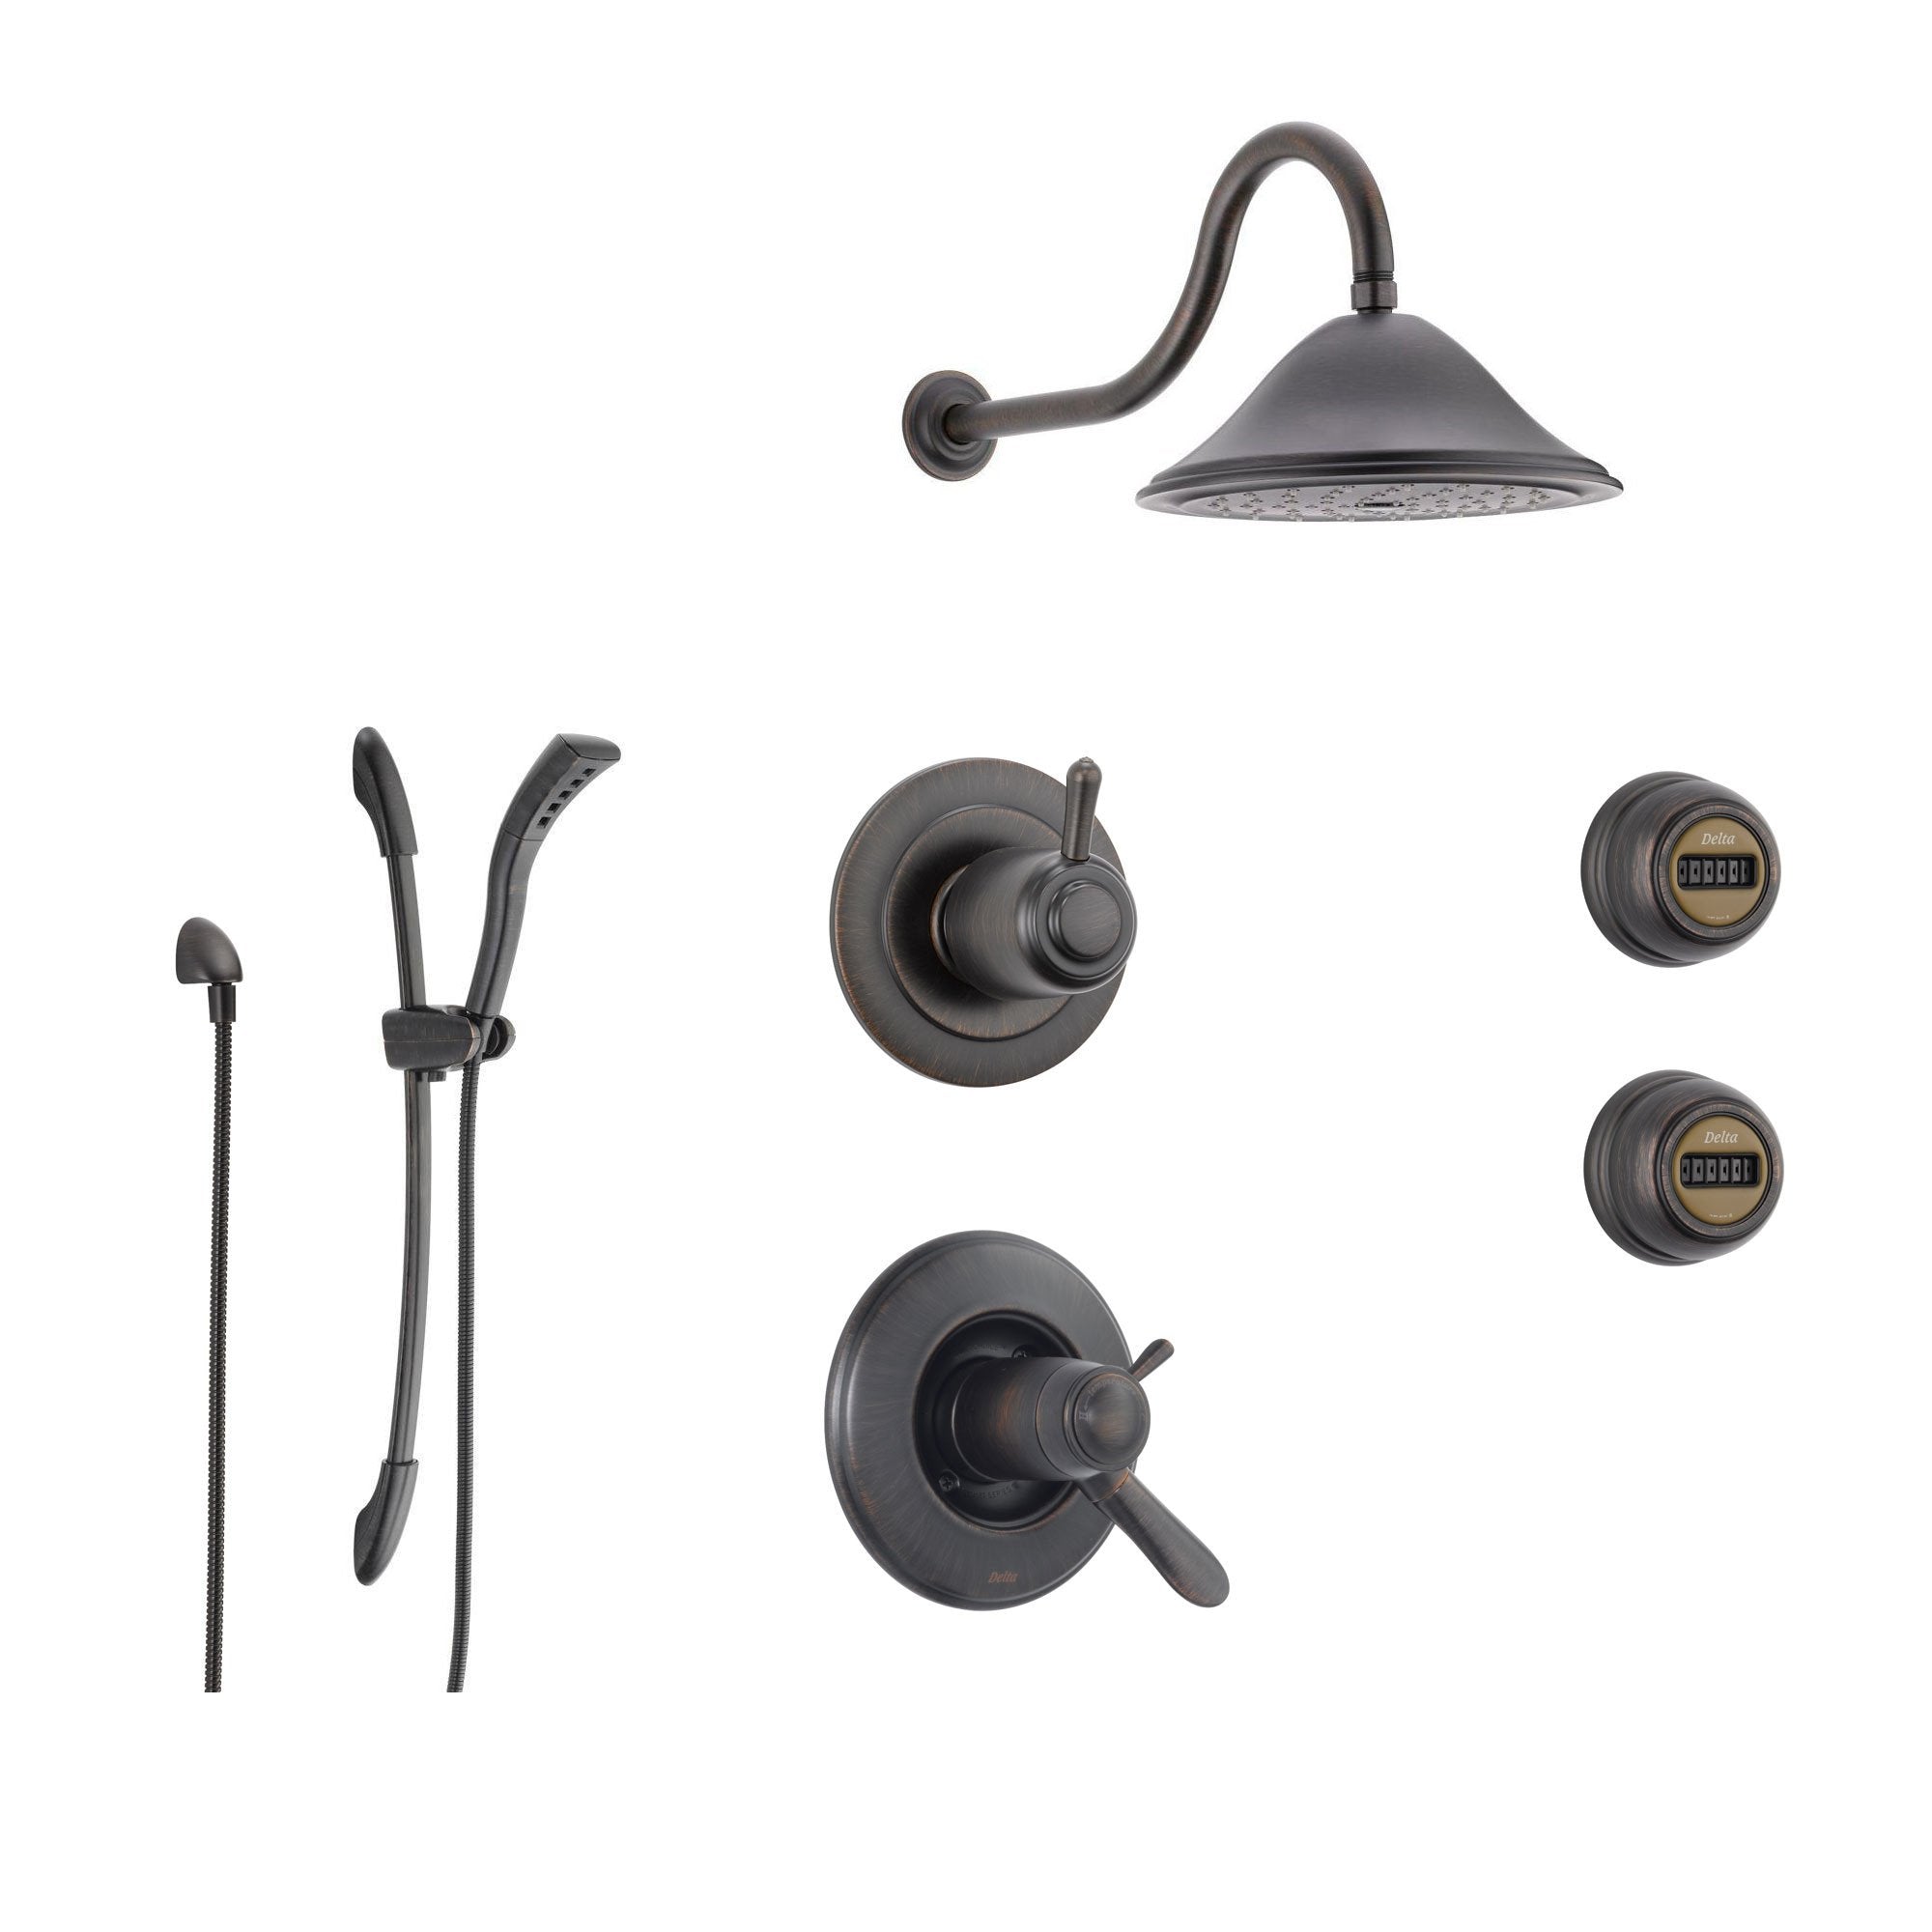 Delta Lahara Venetian Bronze Shower System with Thermostatic Shower Handle, 6-setting Diverter, Large Rain Showerhead, Handheld Shower, and 2 Body Sprays SS17T3893RB